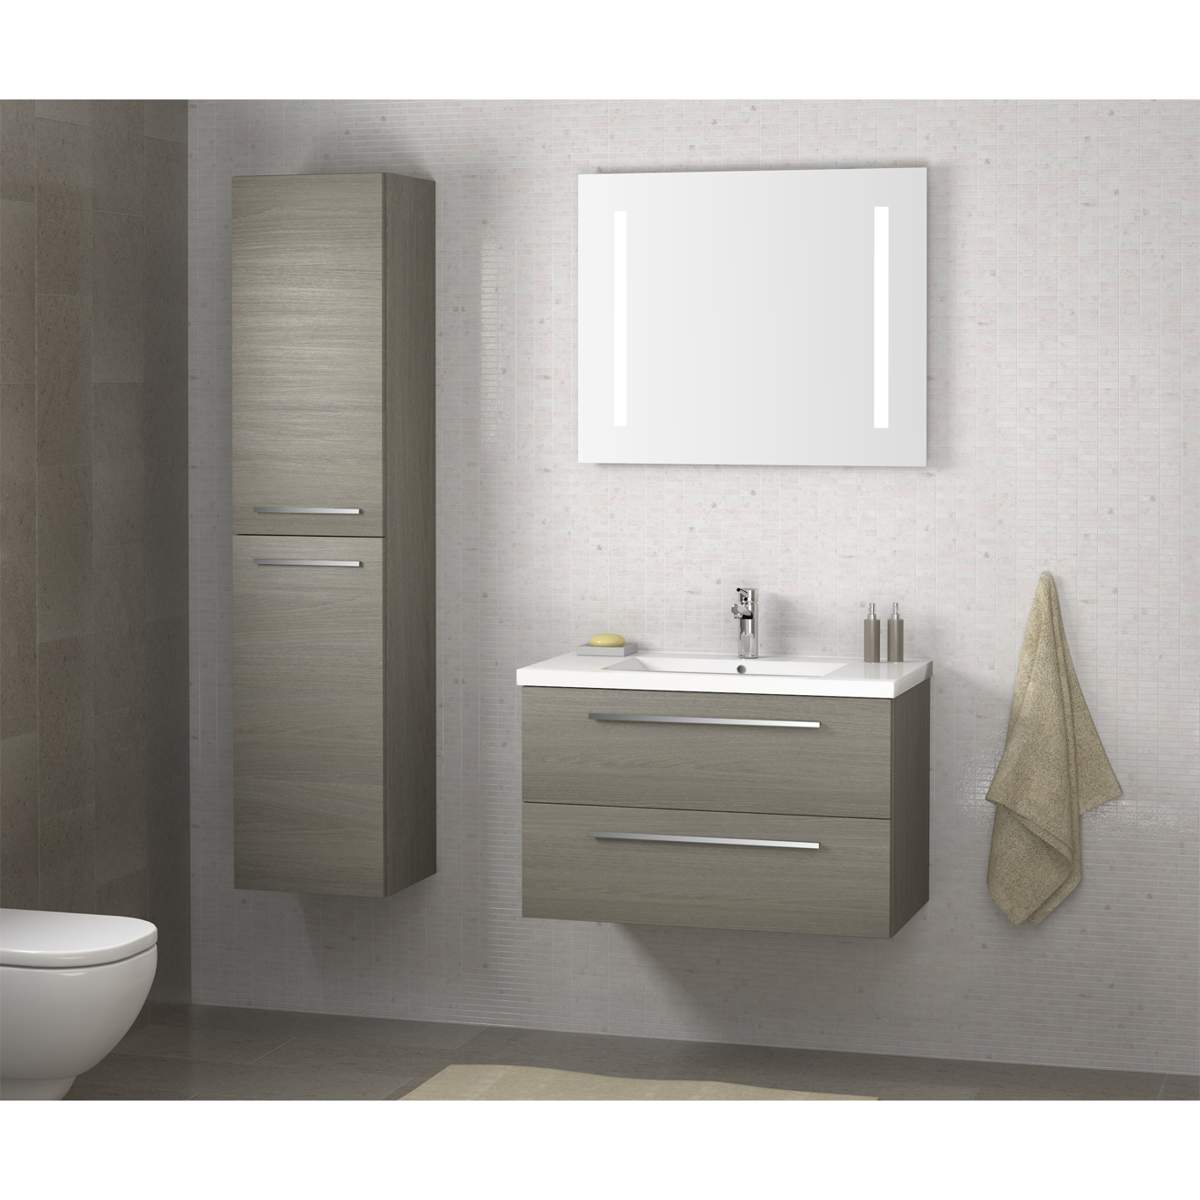 JTP Pace Units 500mm Wall Mounted Unit with Drawers and Basin in Grey (PWM503GR + P500BS)